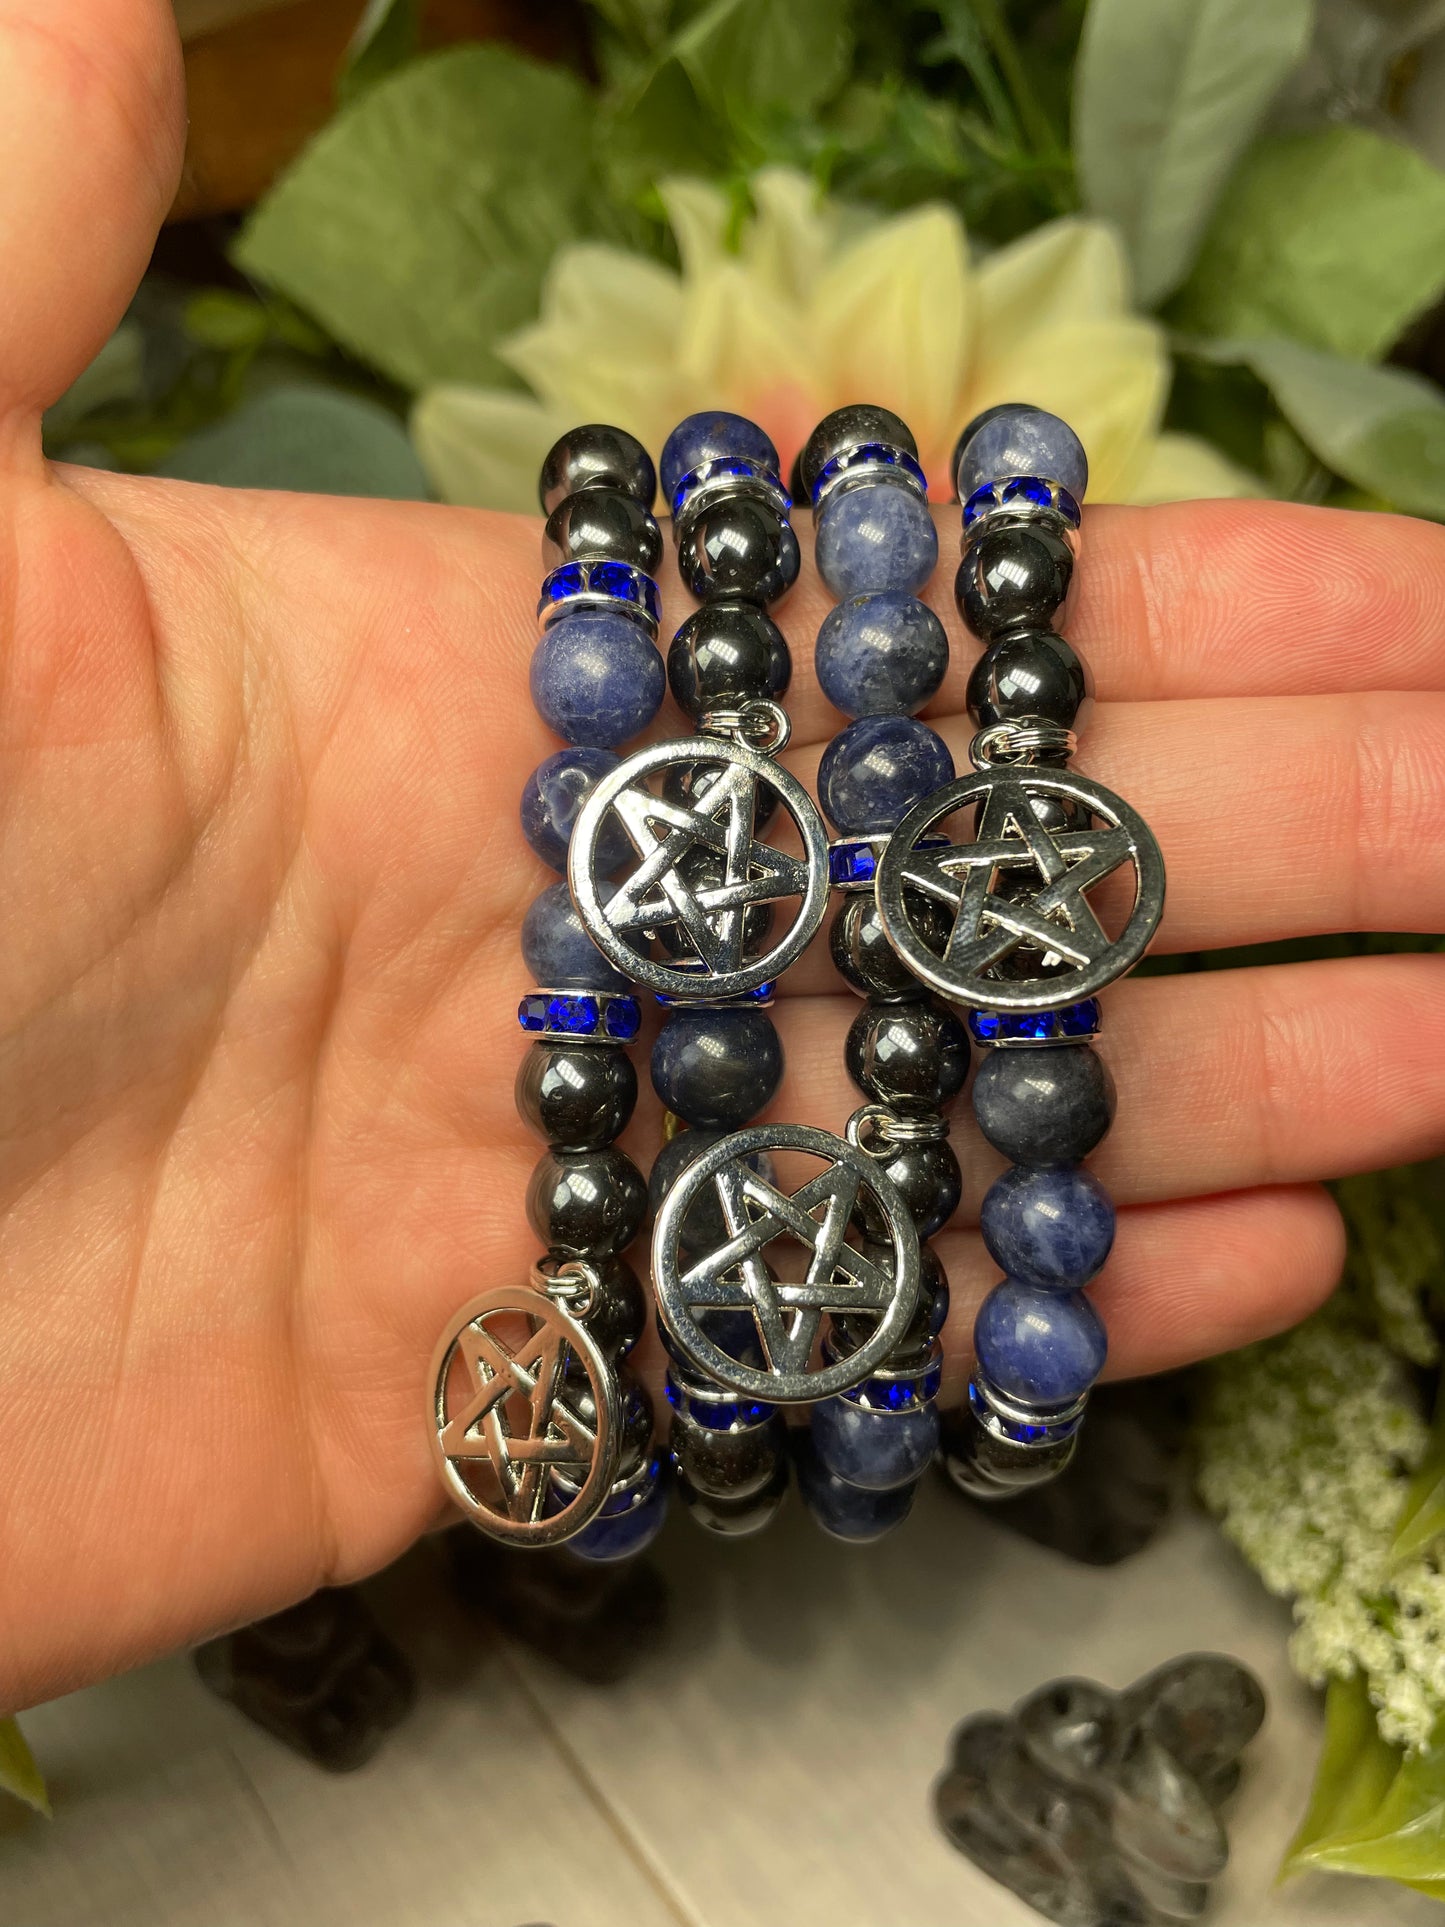 Hematite and Sodalite with Pentacle charm